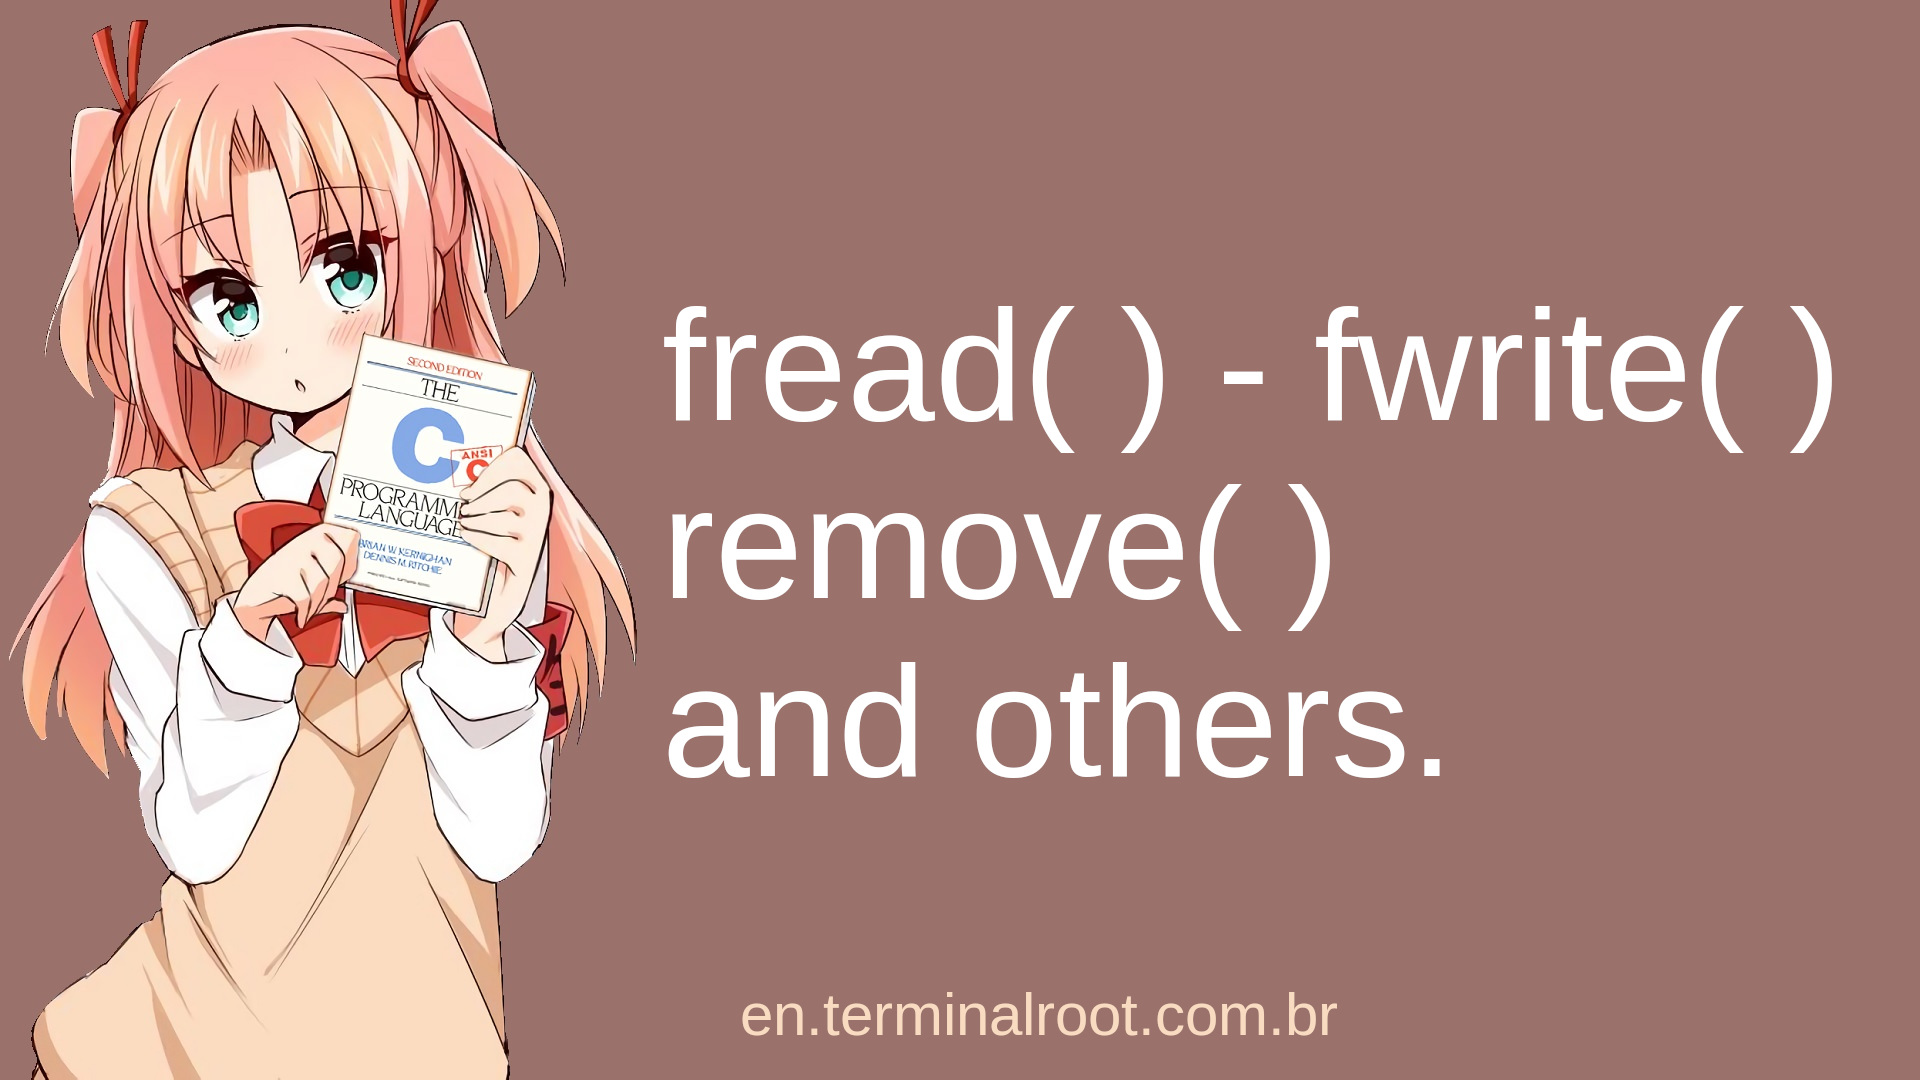 Examples of functions: fread(), fwrite(), remove() and others in C